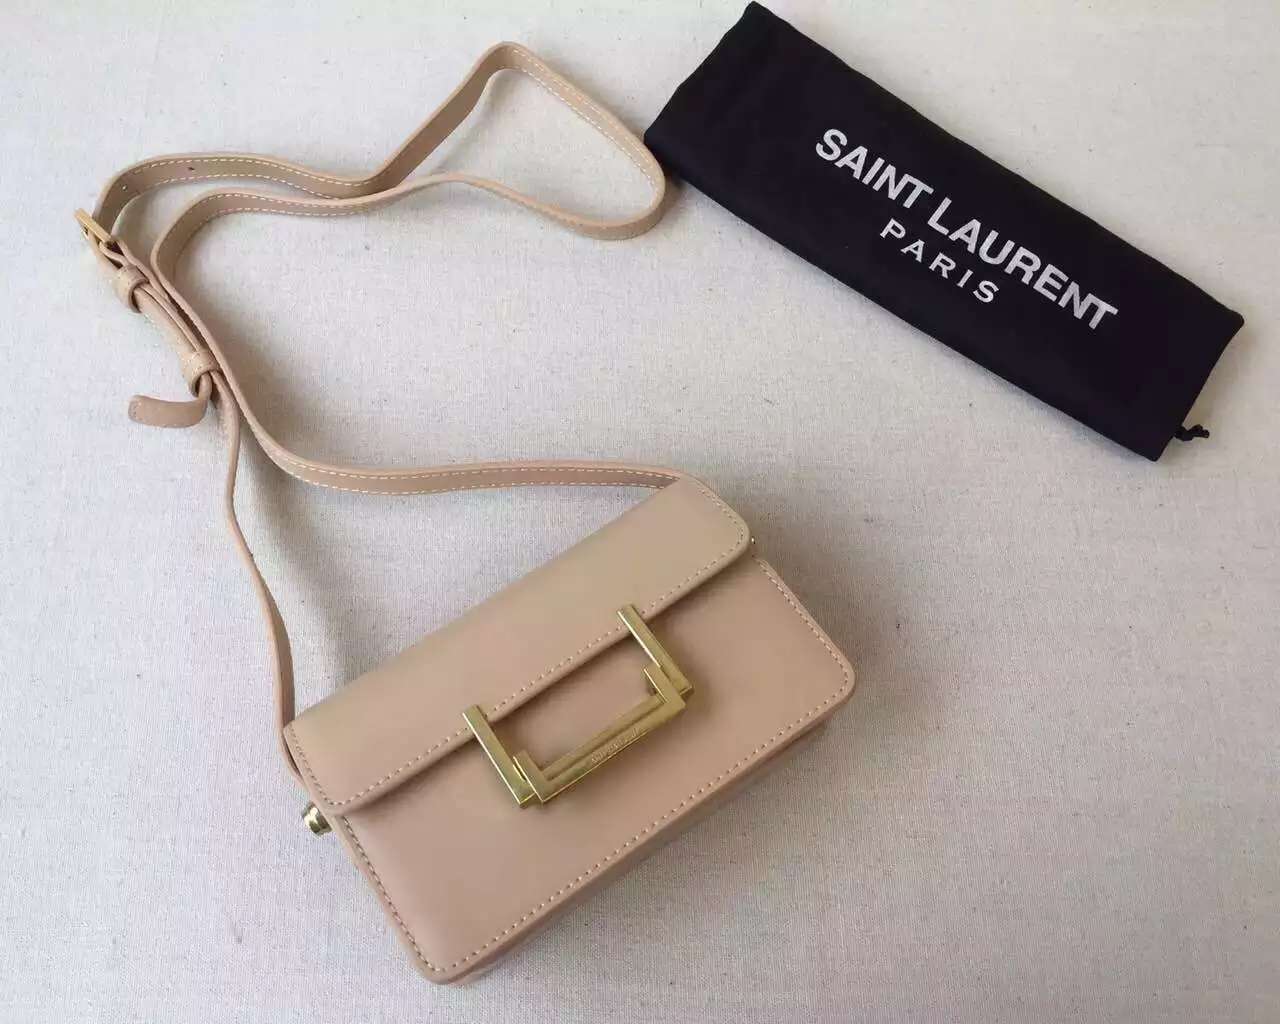 2015 Cheap YSL Out-Sale with Free Shipping-Saint Laurent Classic Small Lulu Leather Bag in Apricot Calfskin Leather